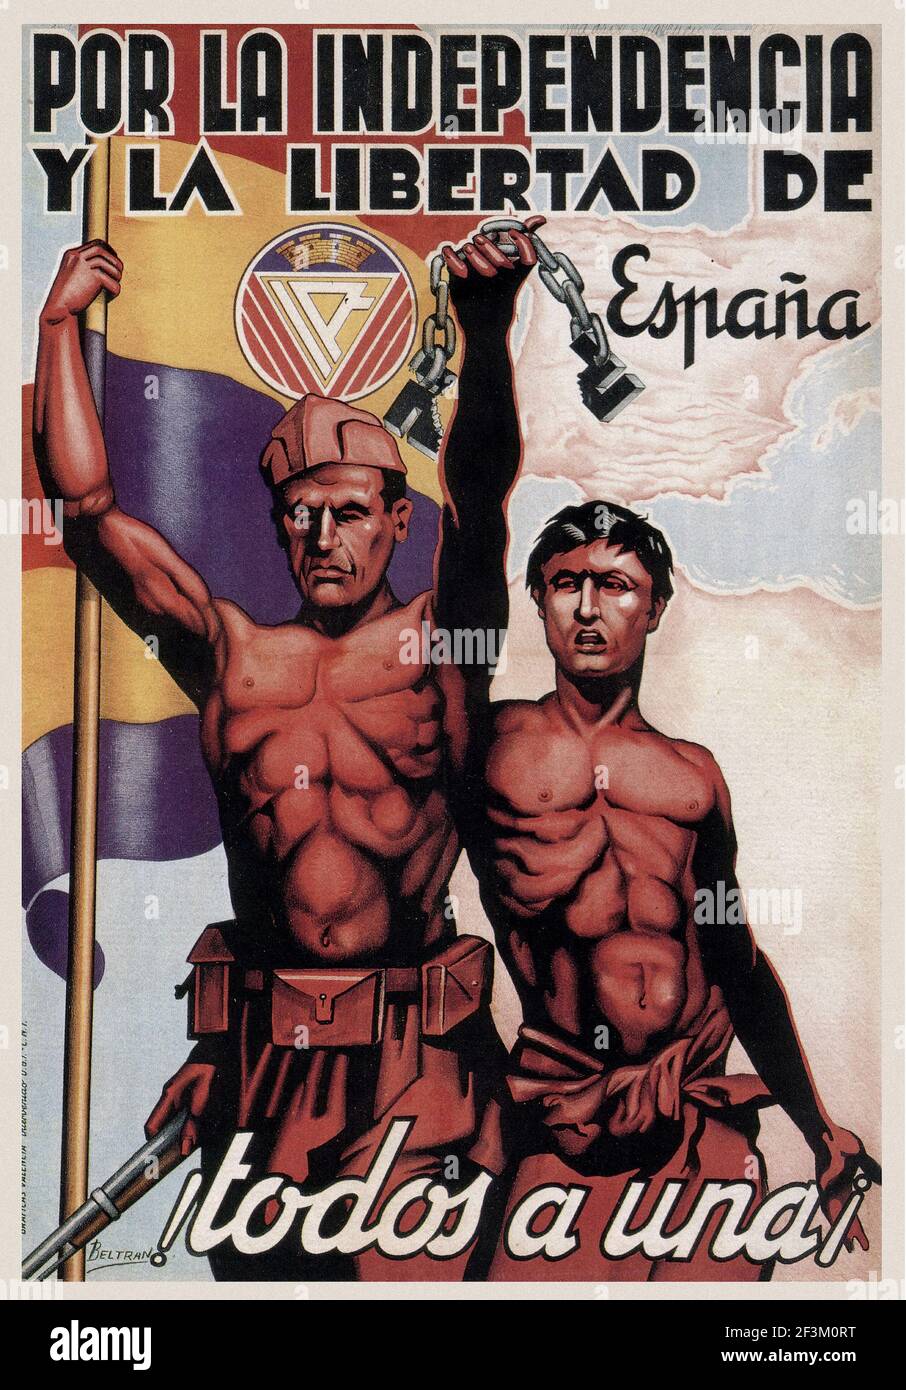 Spanish Civil War propaganda poster. For independence and freedom of Spain, 1937 Stock Photo